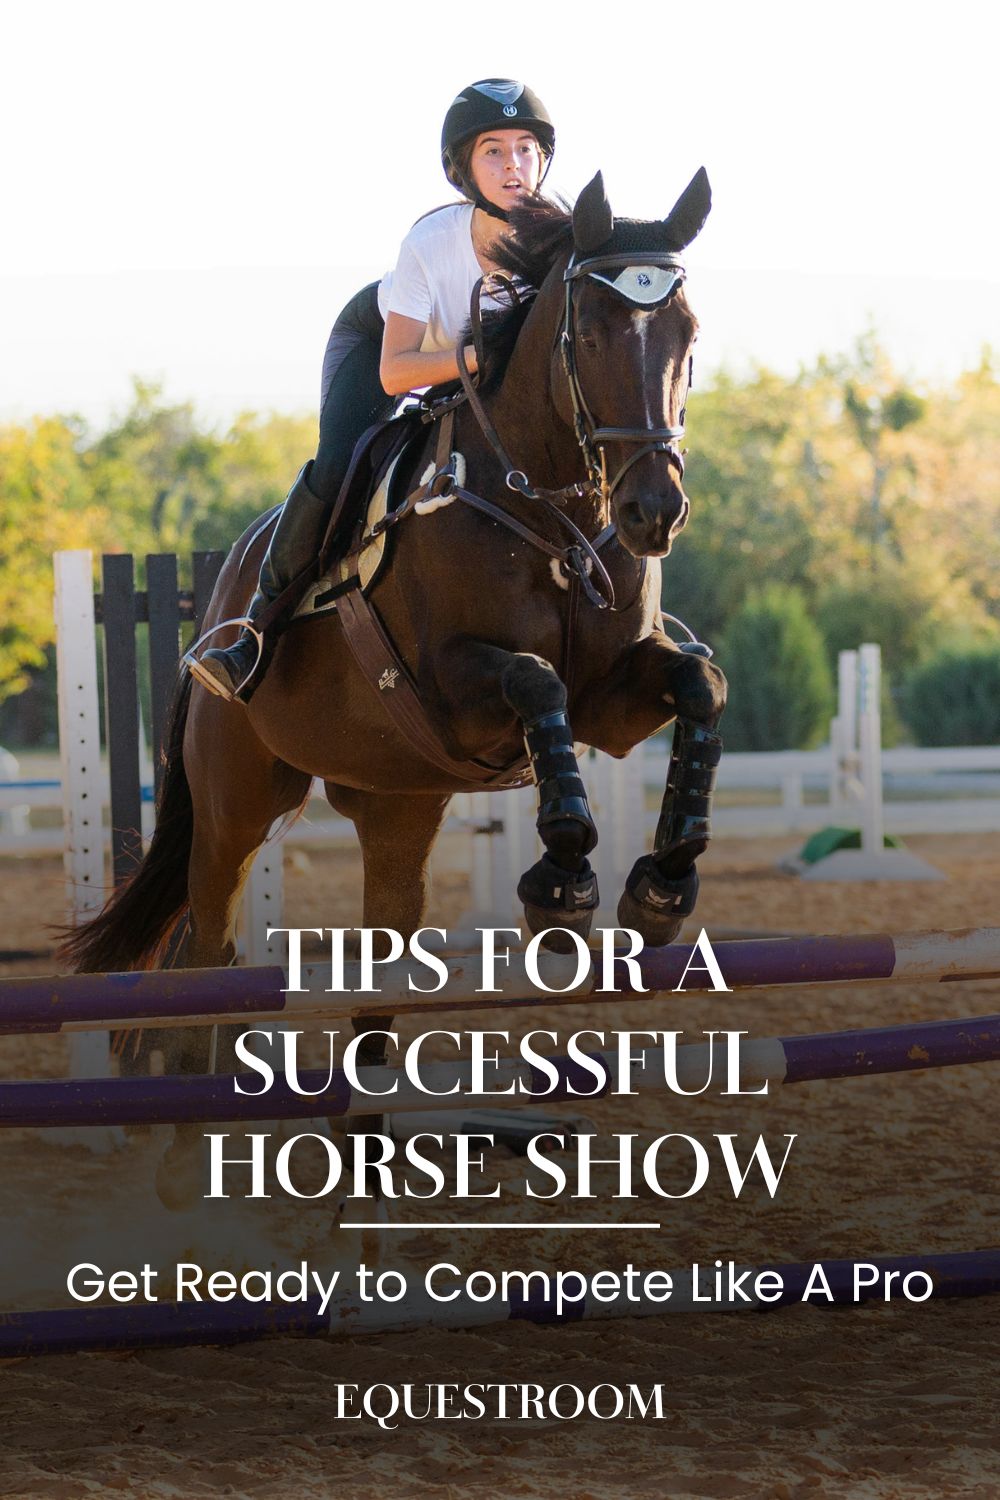 Get Ready to Compete Like A Professional Rider